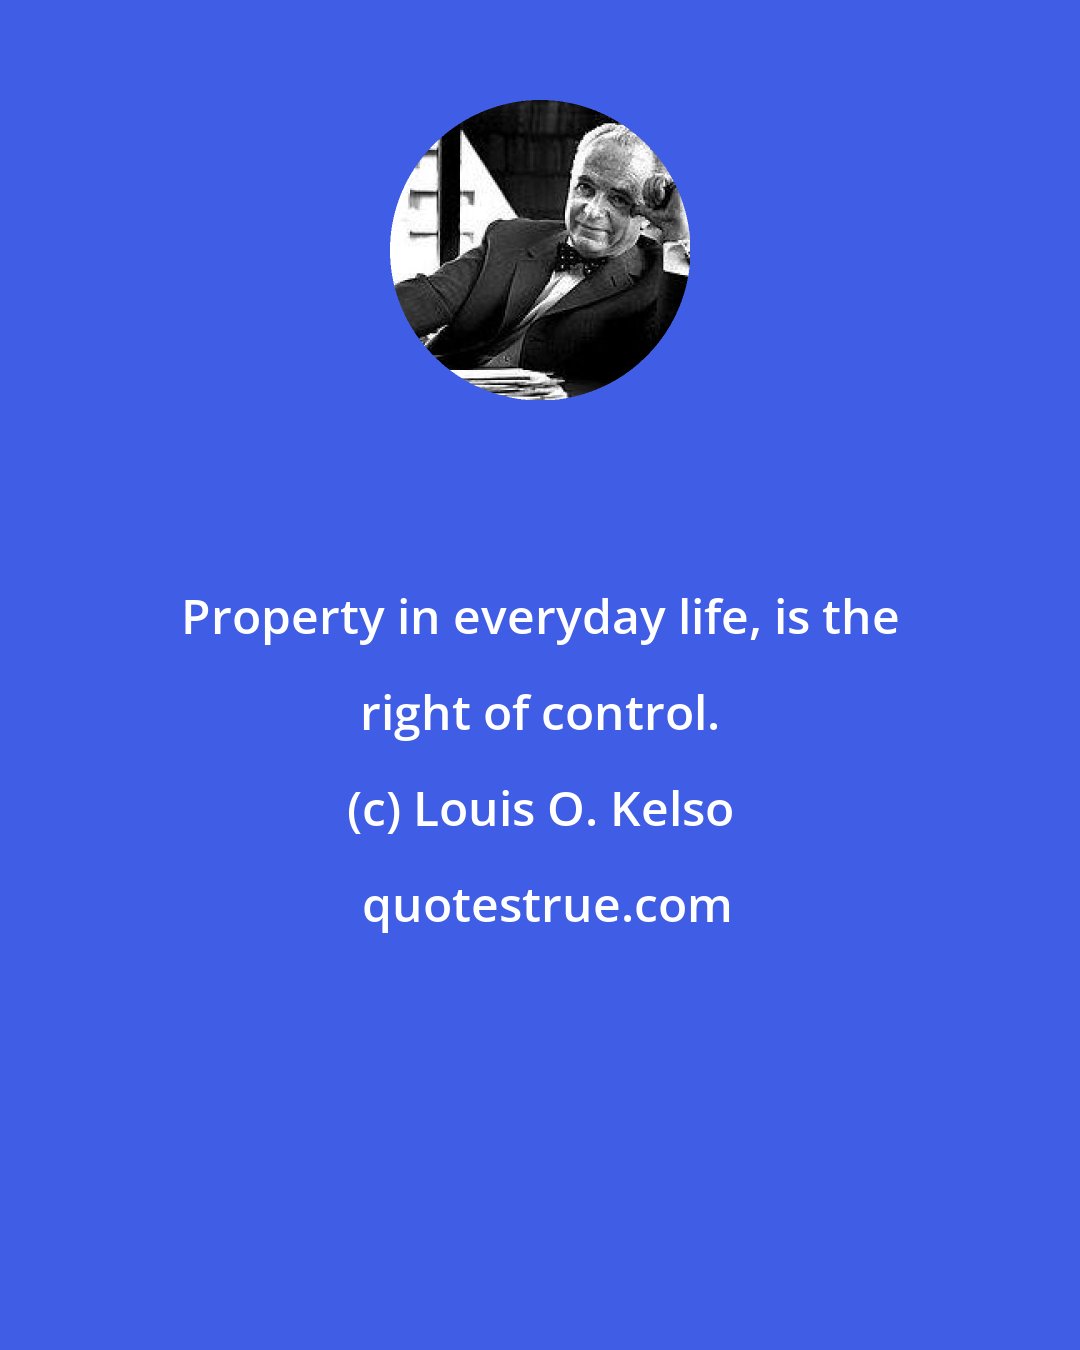 Louis O. Kelso: Property in everyday life, is the right of control.